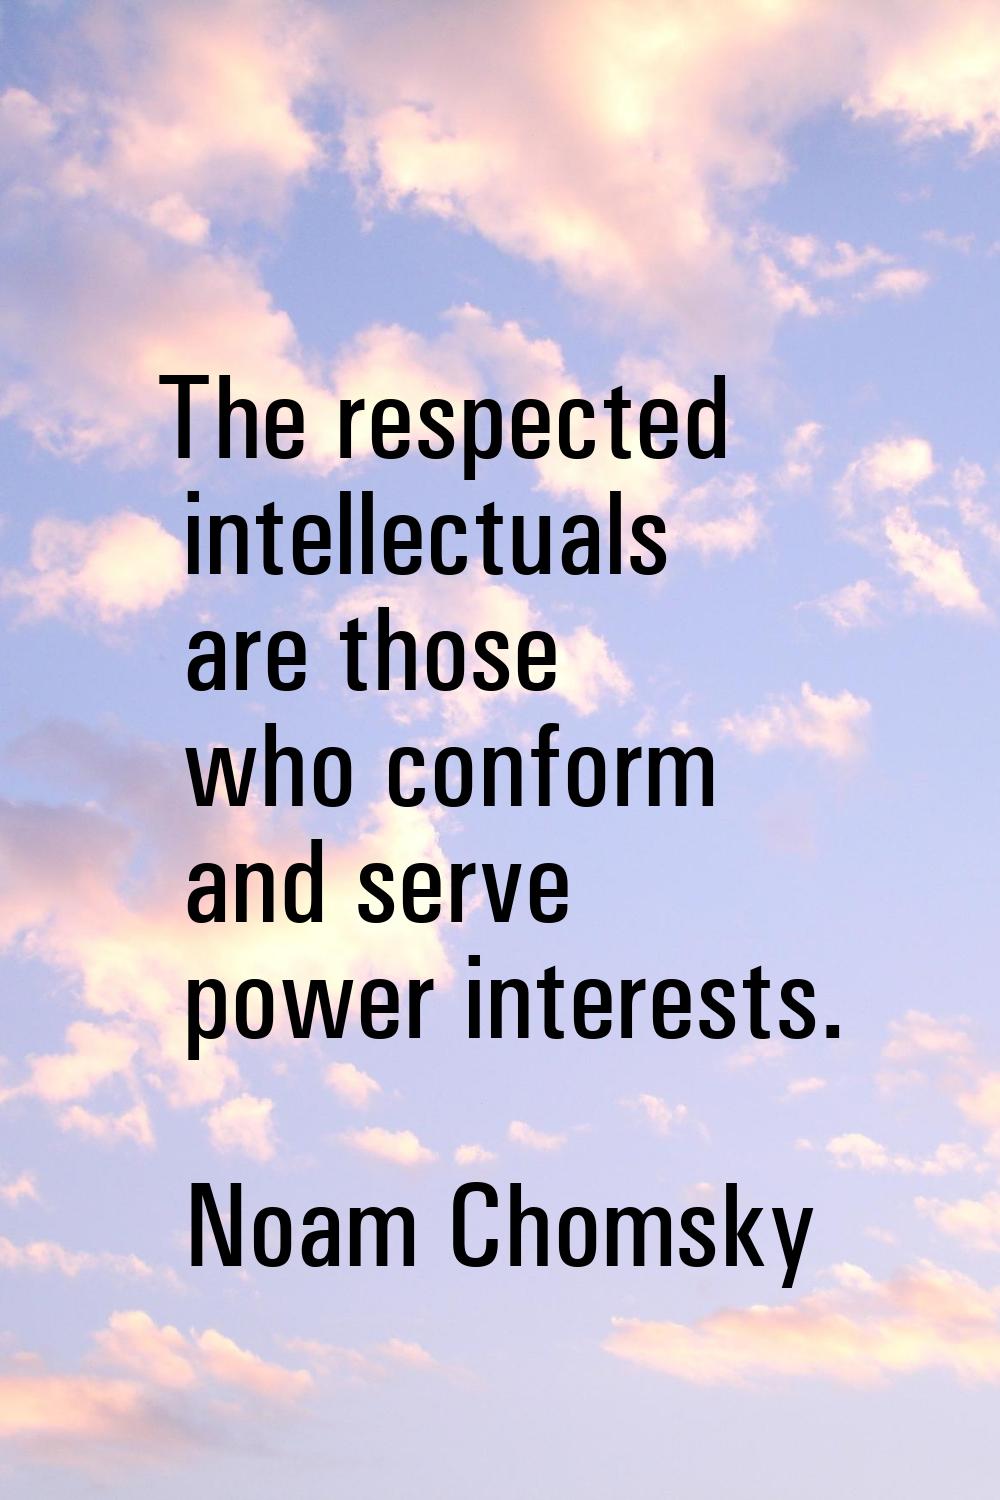 The respected intellectuals are those who conform and serve power interests.